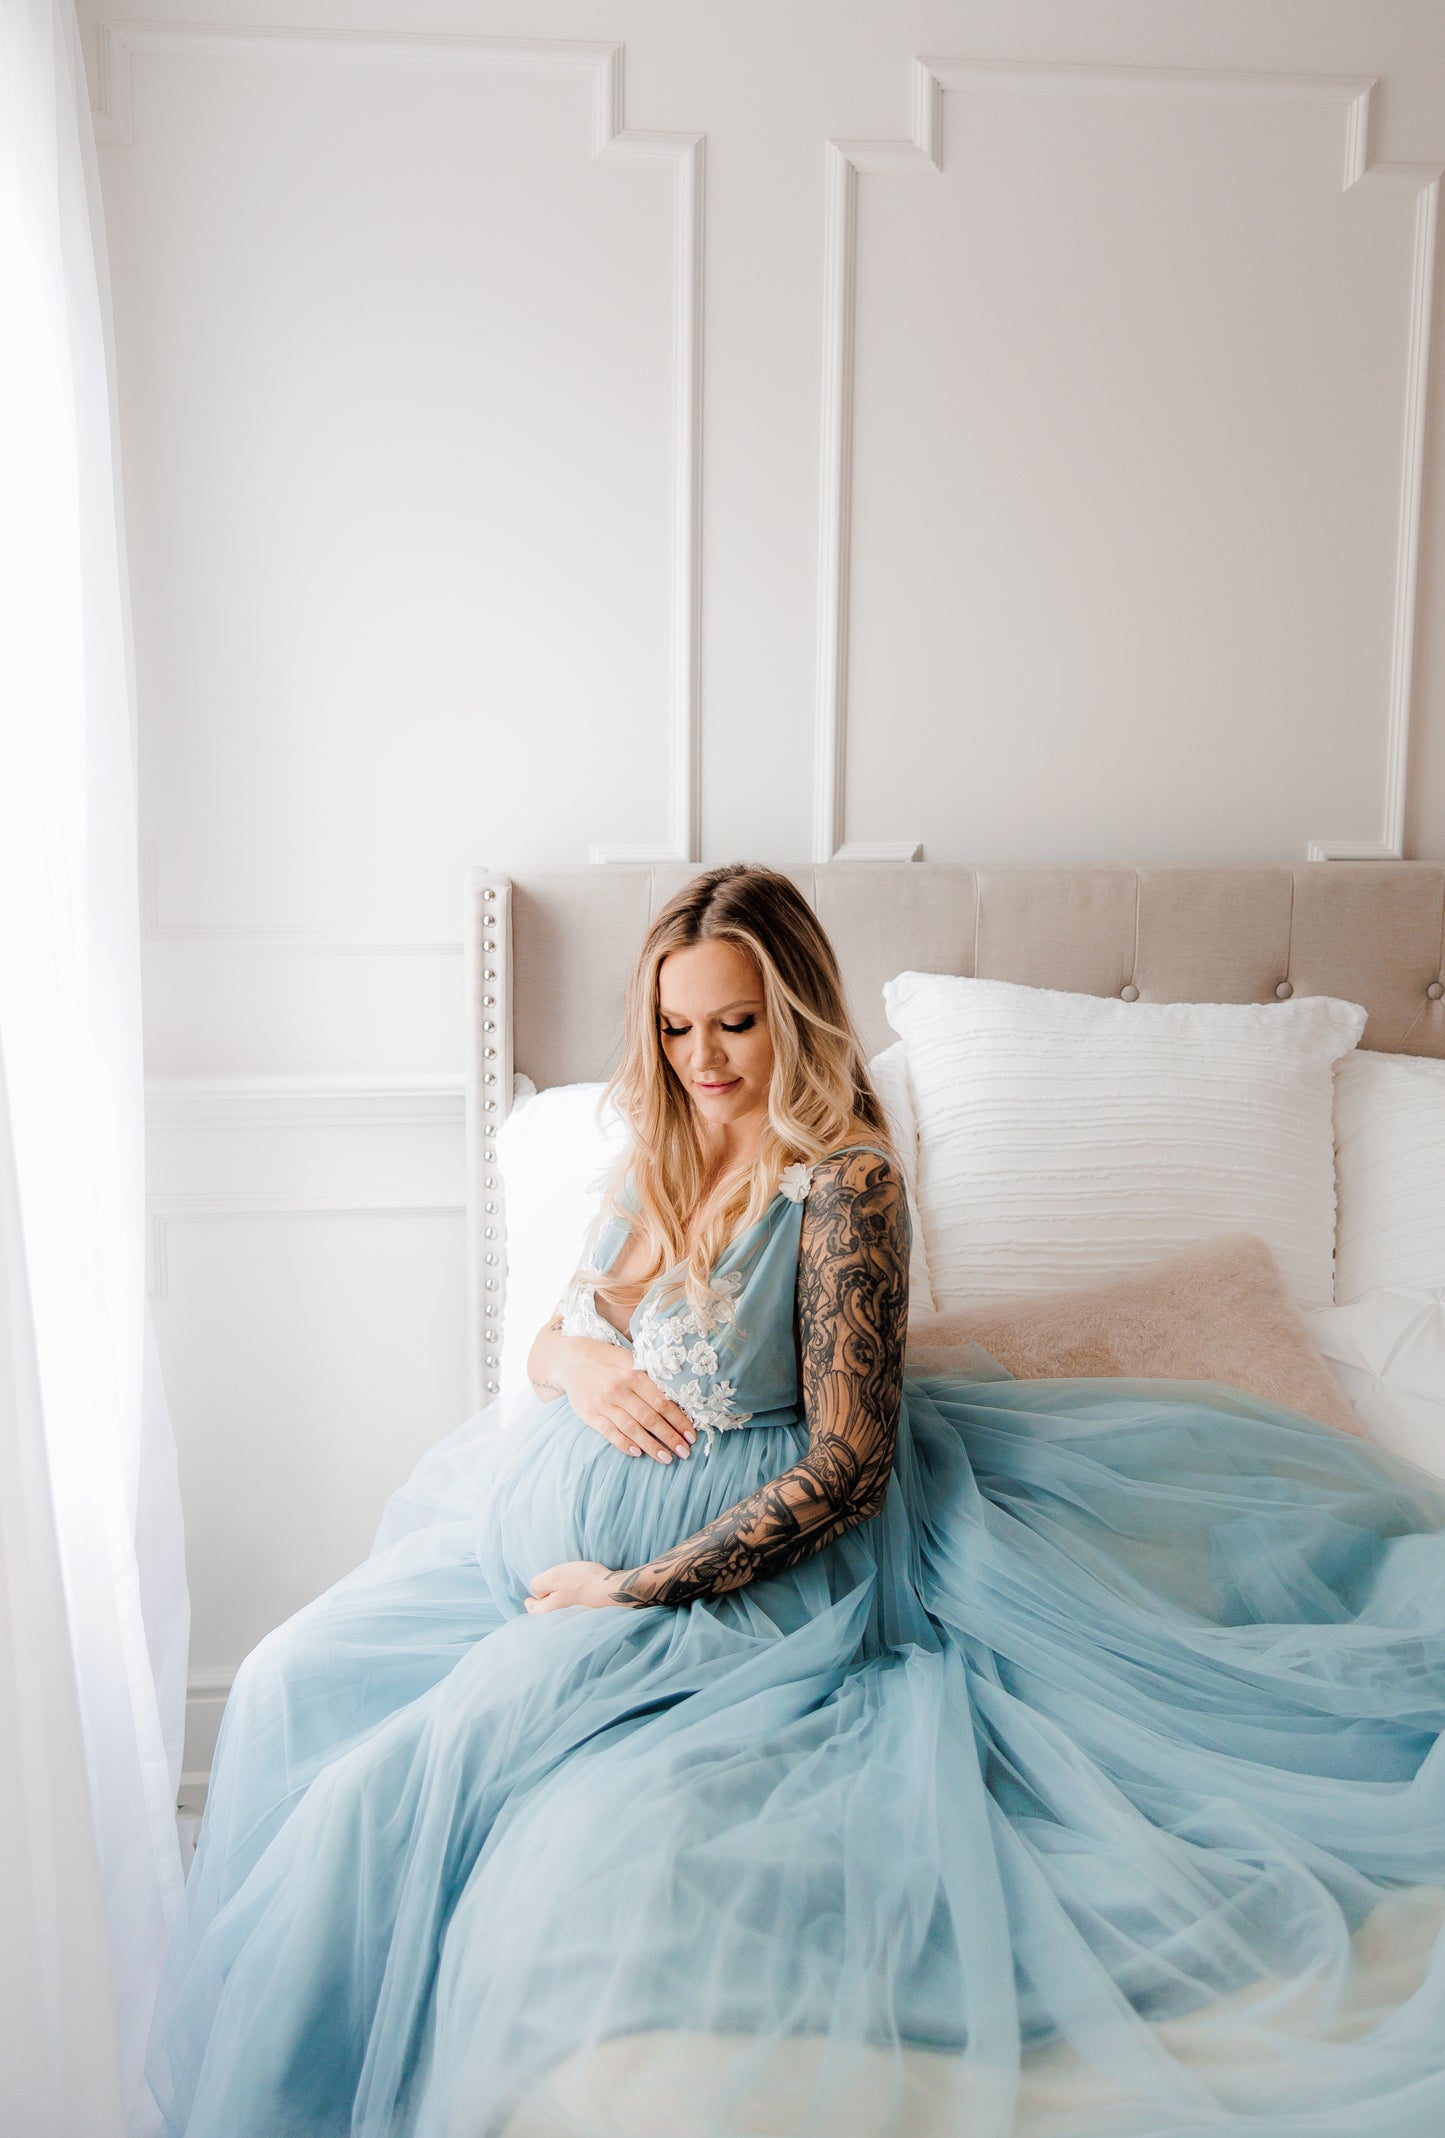 Baby Blue Beth Gown - maternity photoshoot dress